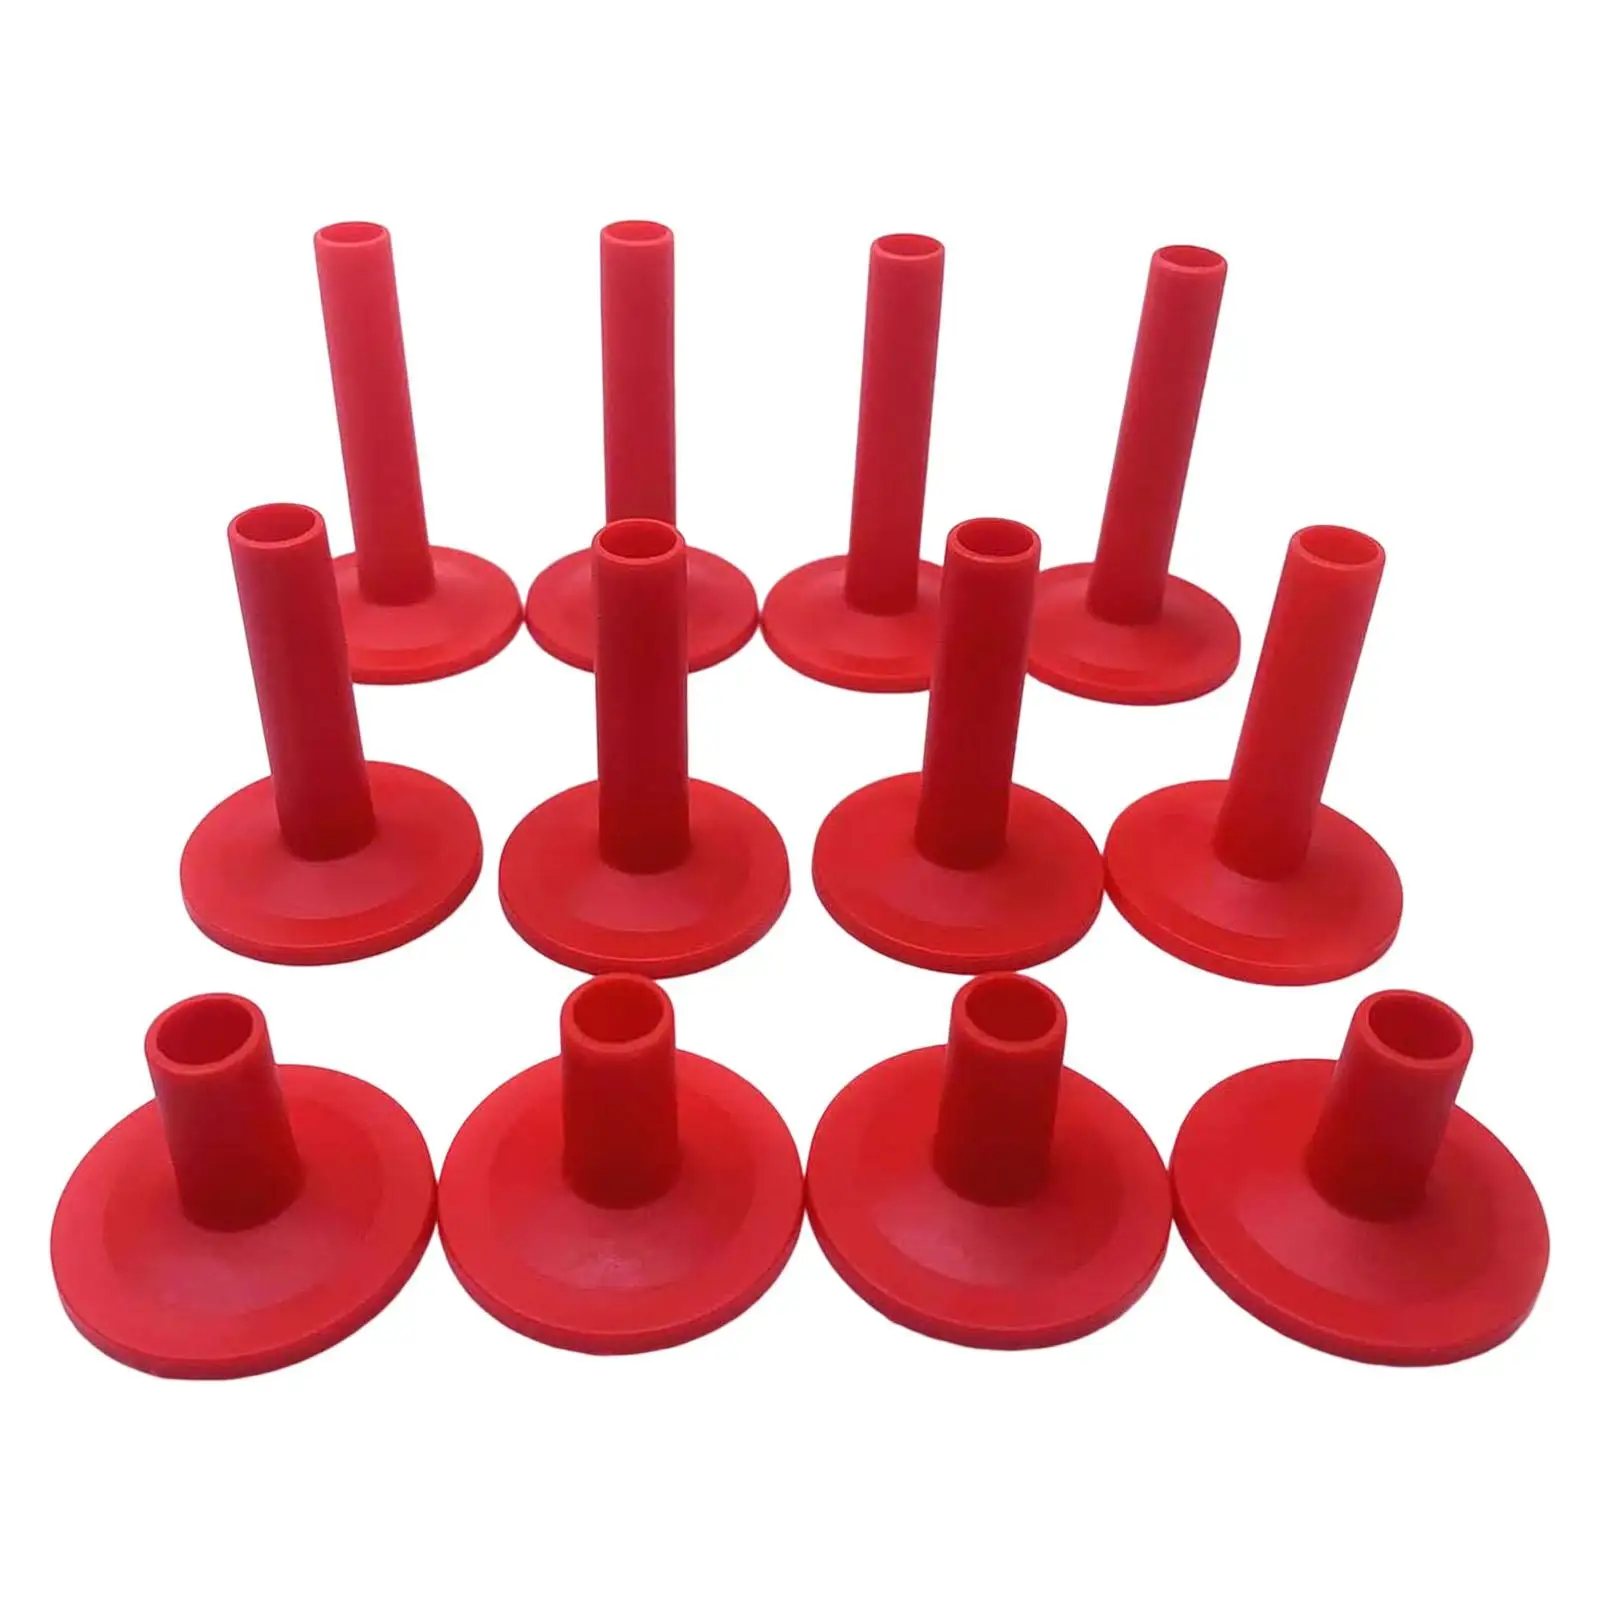 12 Pcs Durable Cymbal Sleeves Long Medium Short Flanged Drum Percussion Accessories Flexible Casing Pipe Tool for Shelf Drum Kit